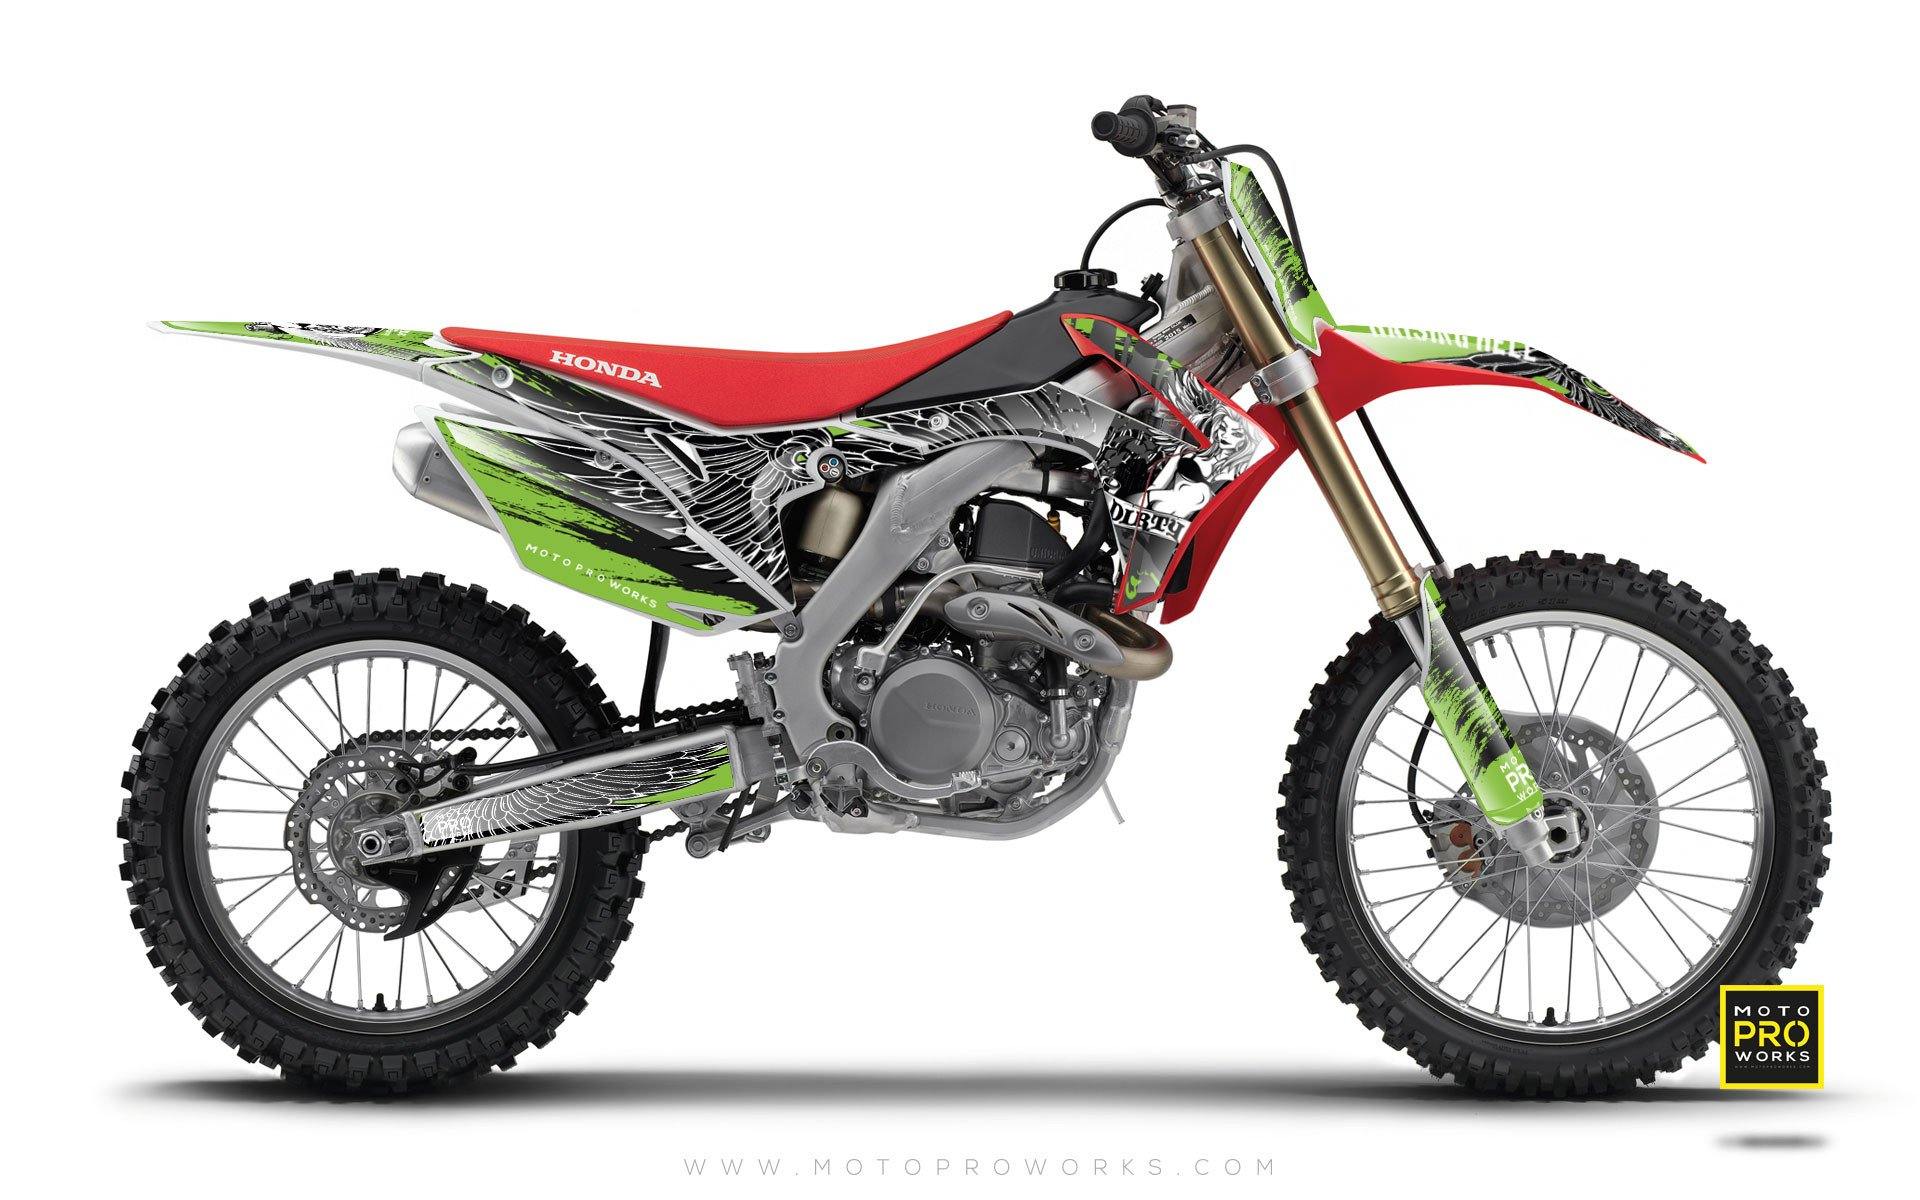 Honda GRAPHIC KIT - "DIRTY ANGEL" (green) - MotoProWorks | Decals and Bike Graphic kit